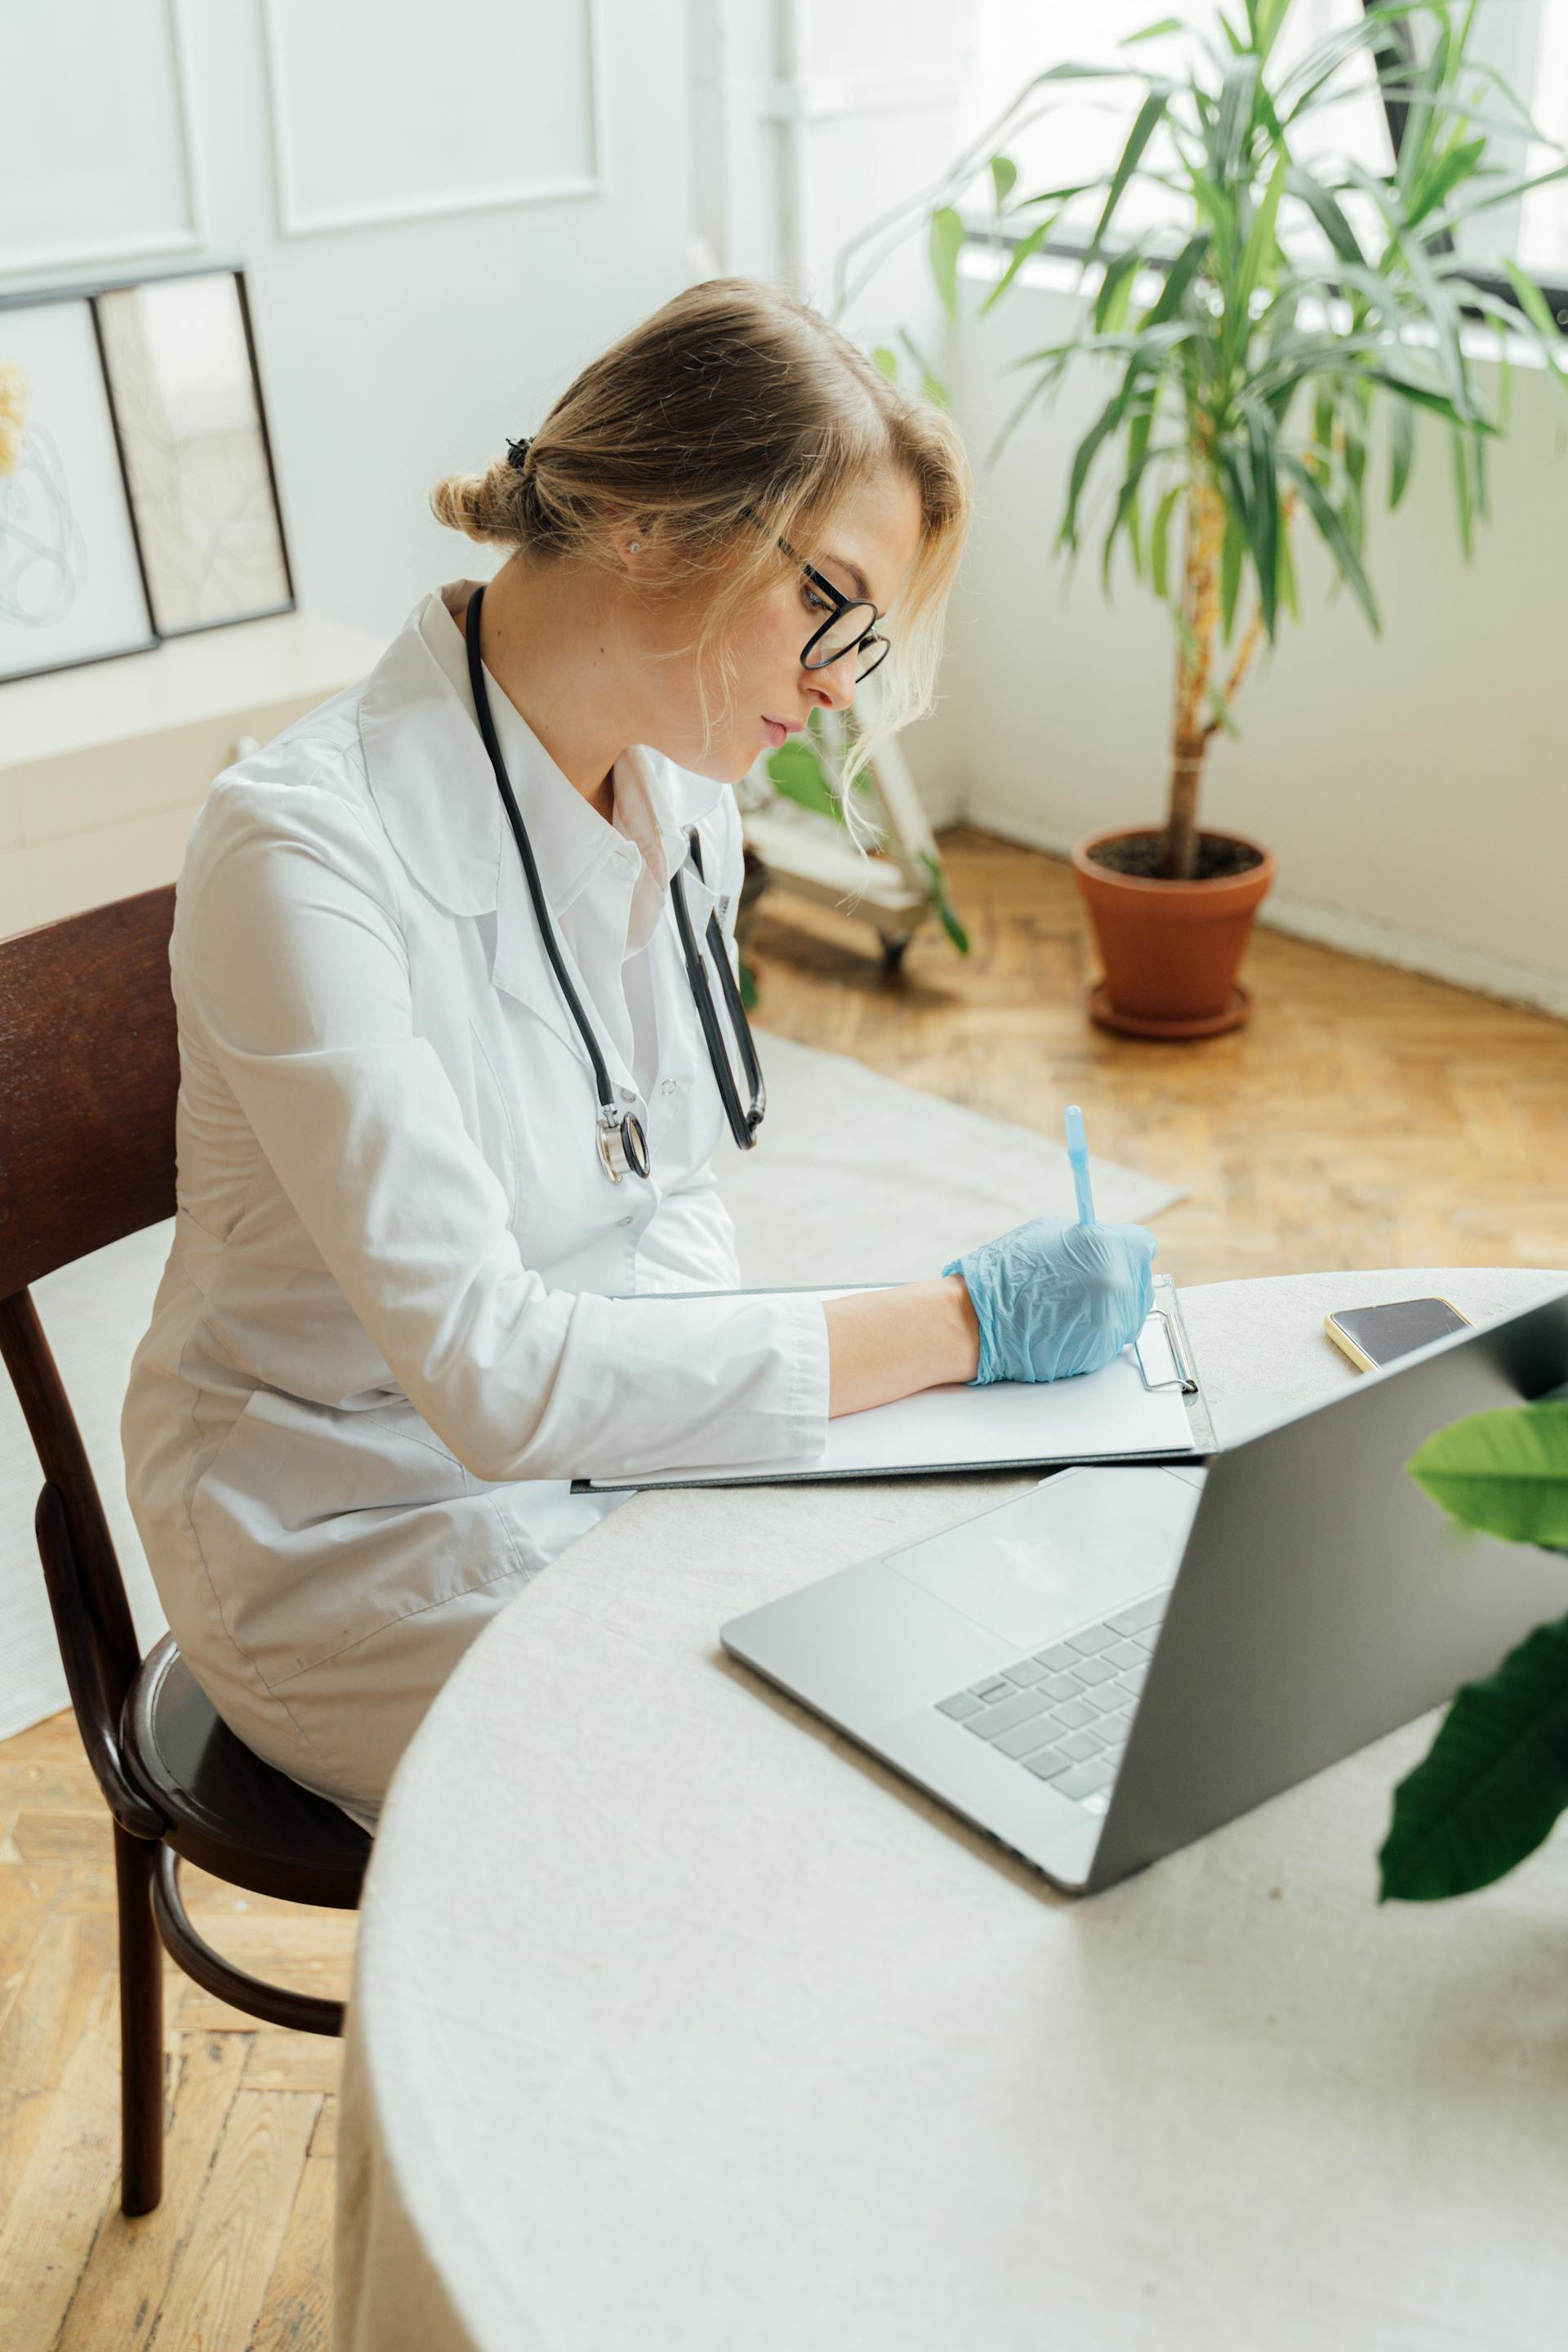 A female doctor writing on a clipboard | Source: Pexels